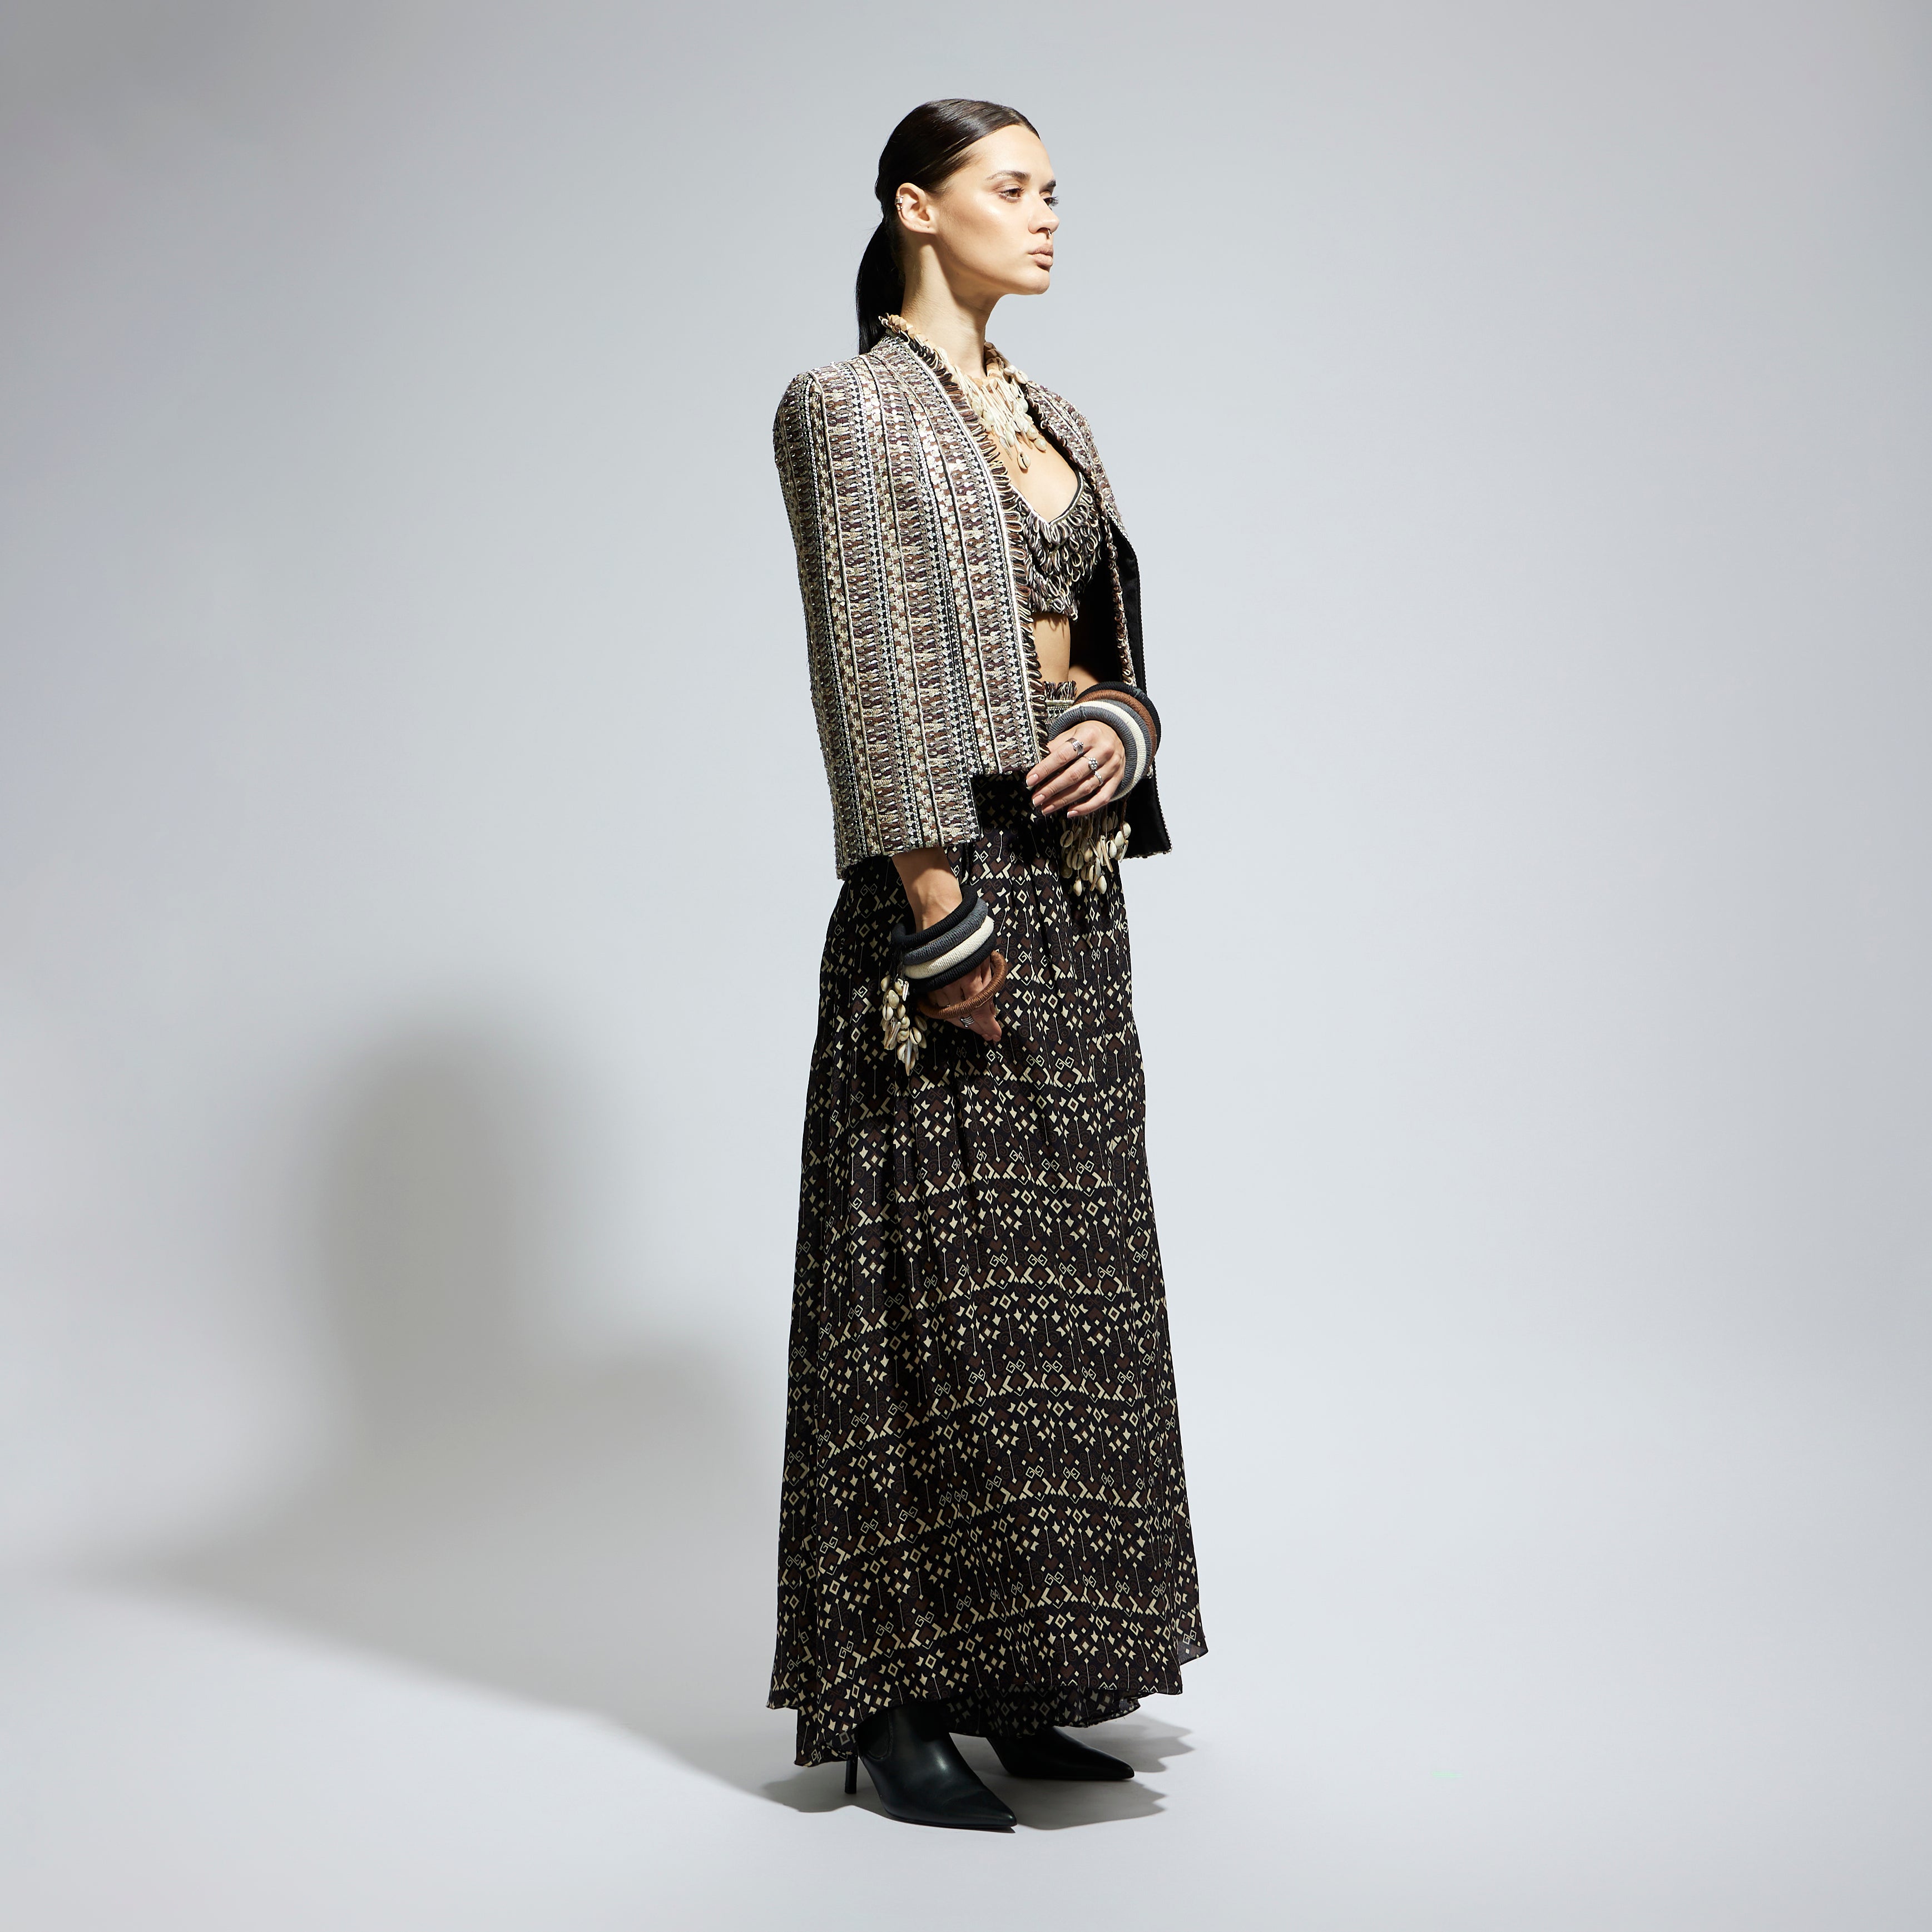 BROWN THREADWORK CAPE JACKET PAIRED WITH TEXTURED BUSTIER AND FLARED PANTS